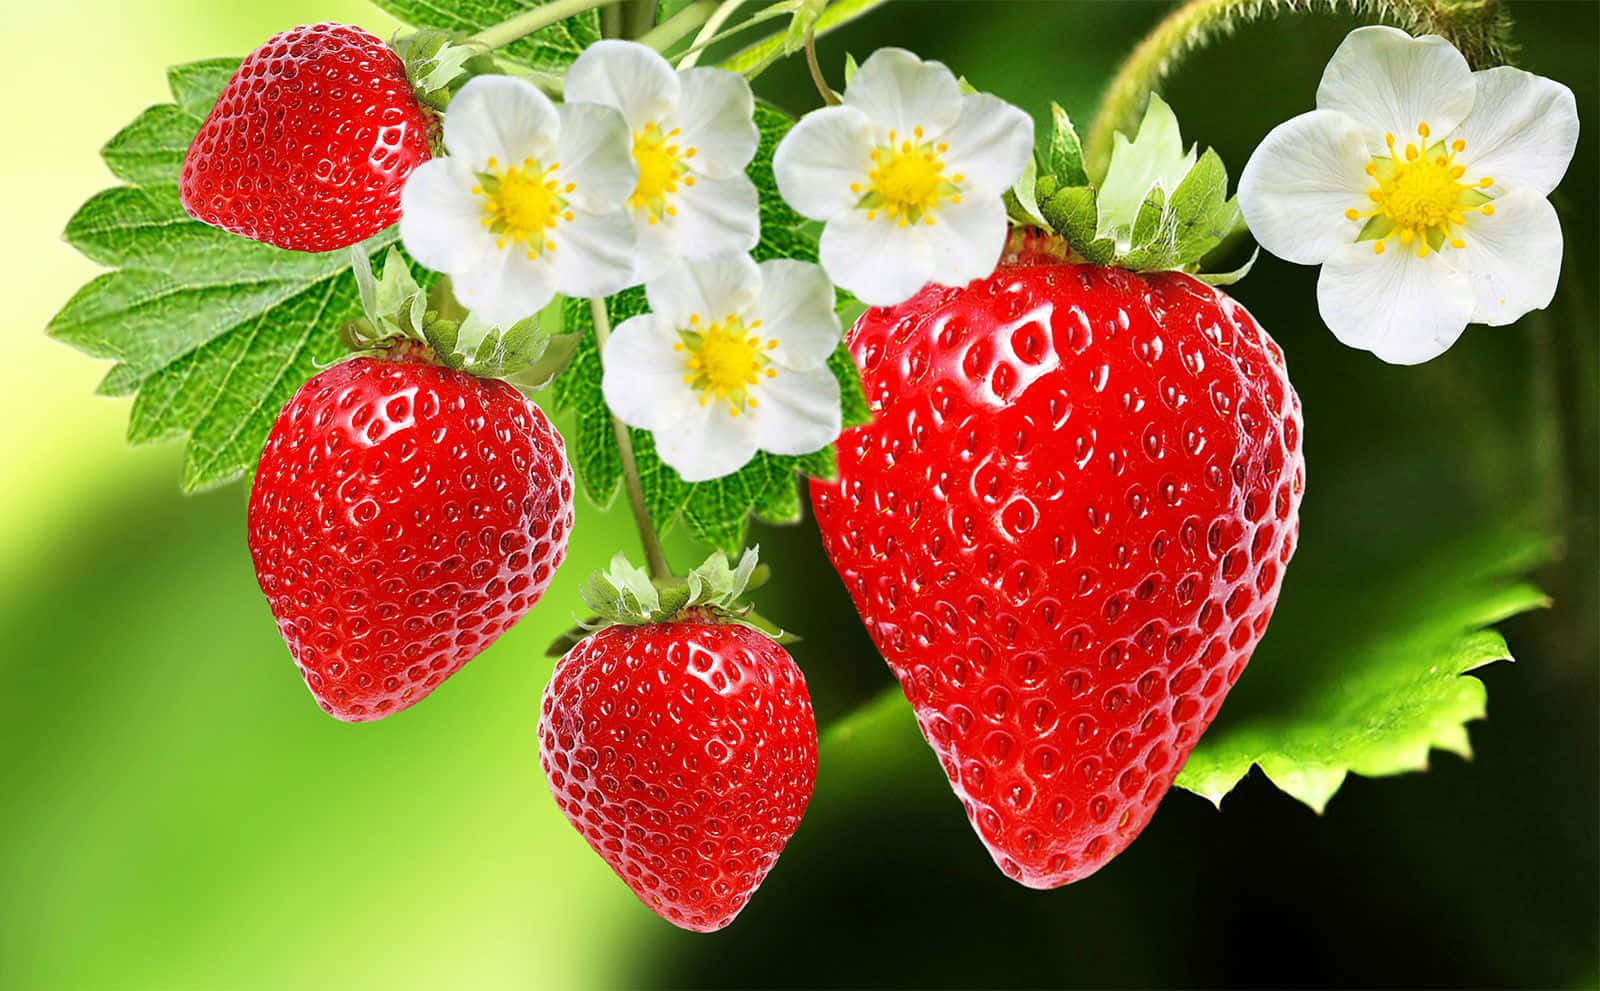 Hanging Flowers And Strawberries Background